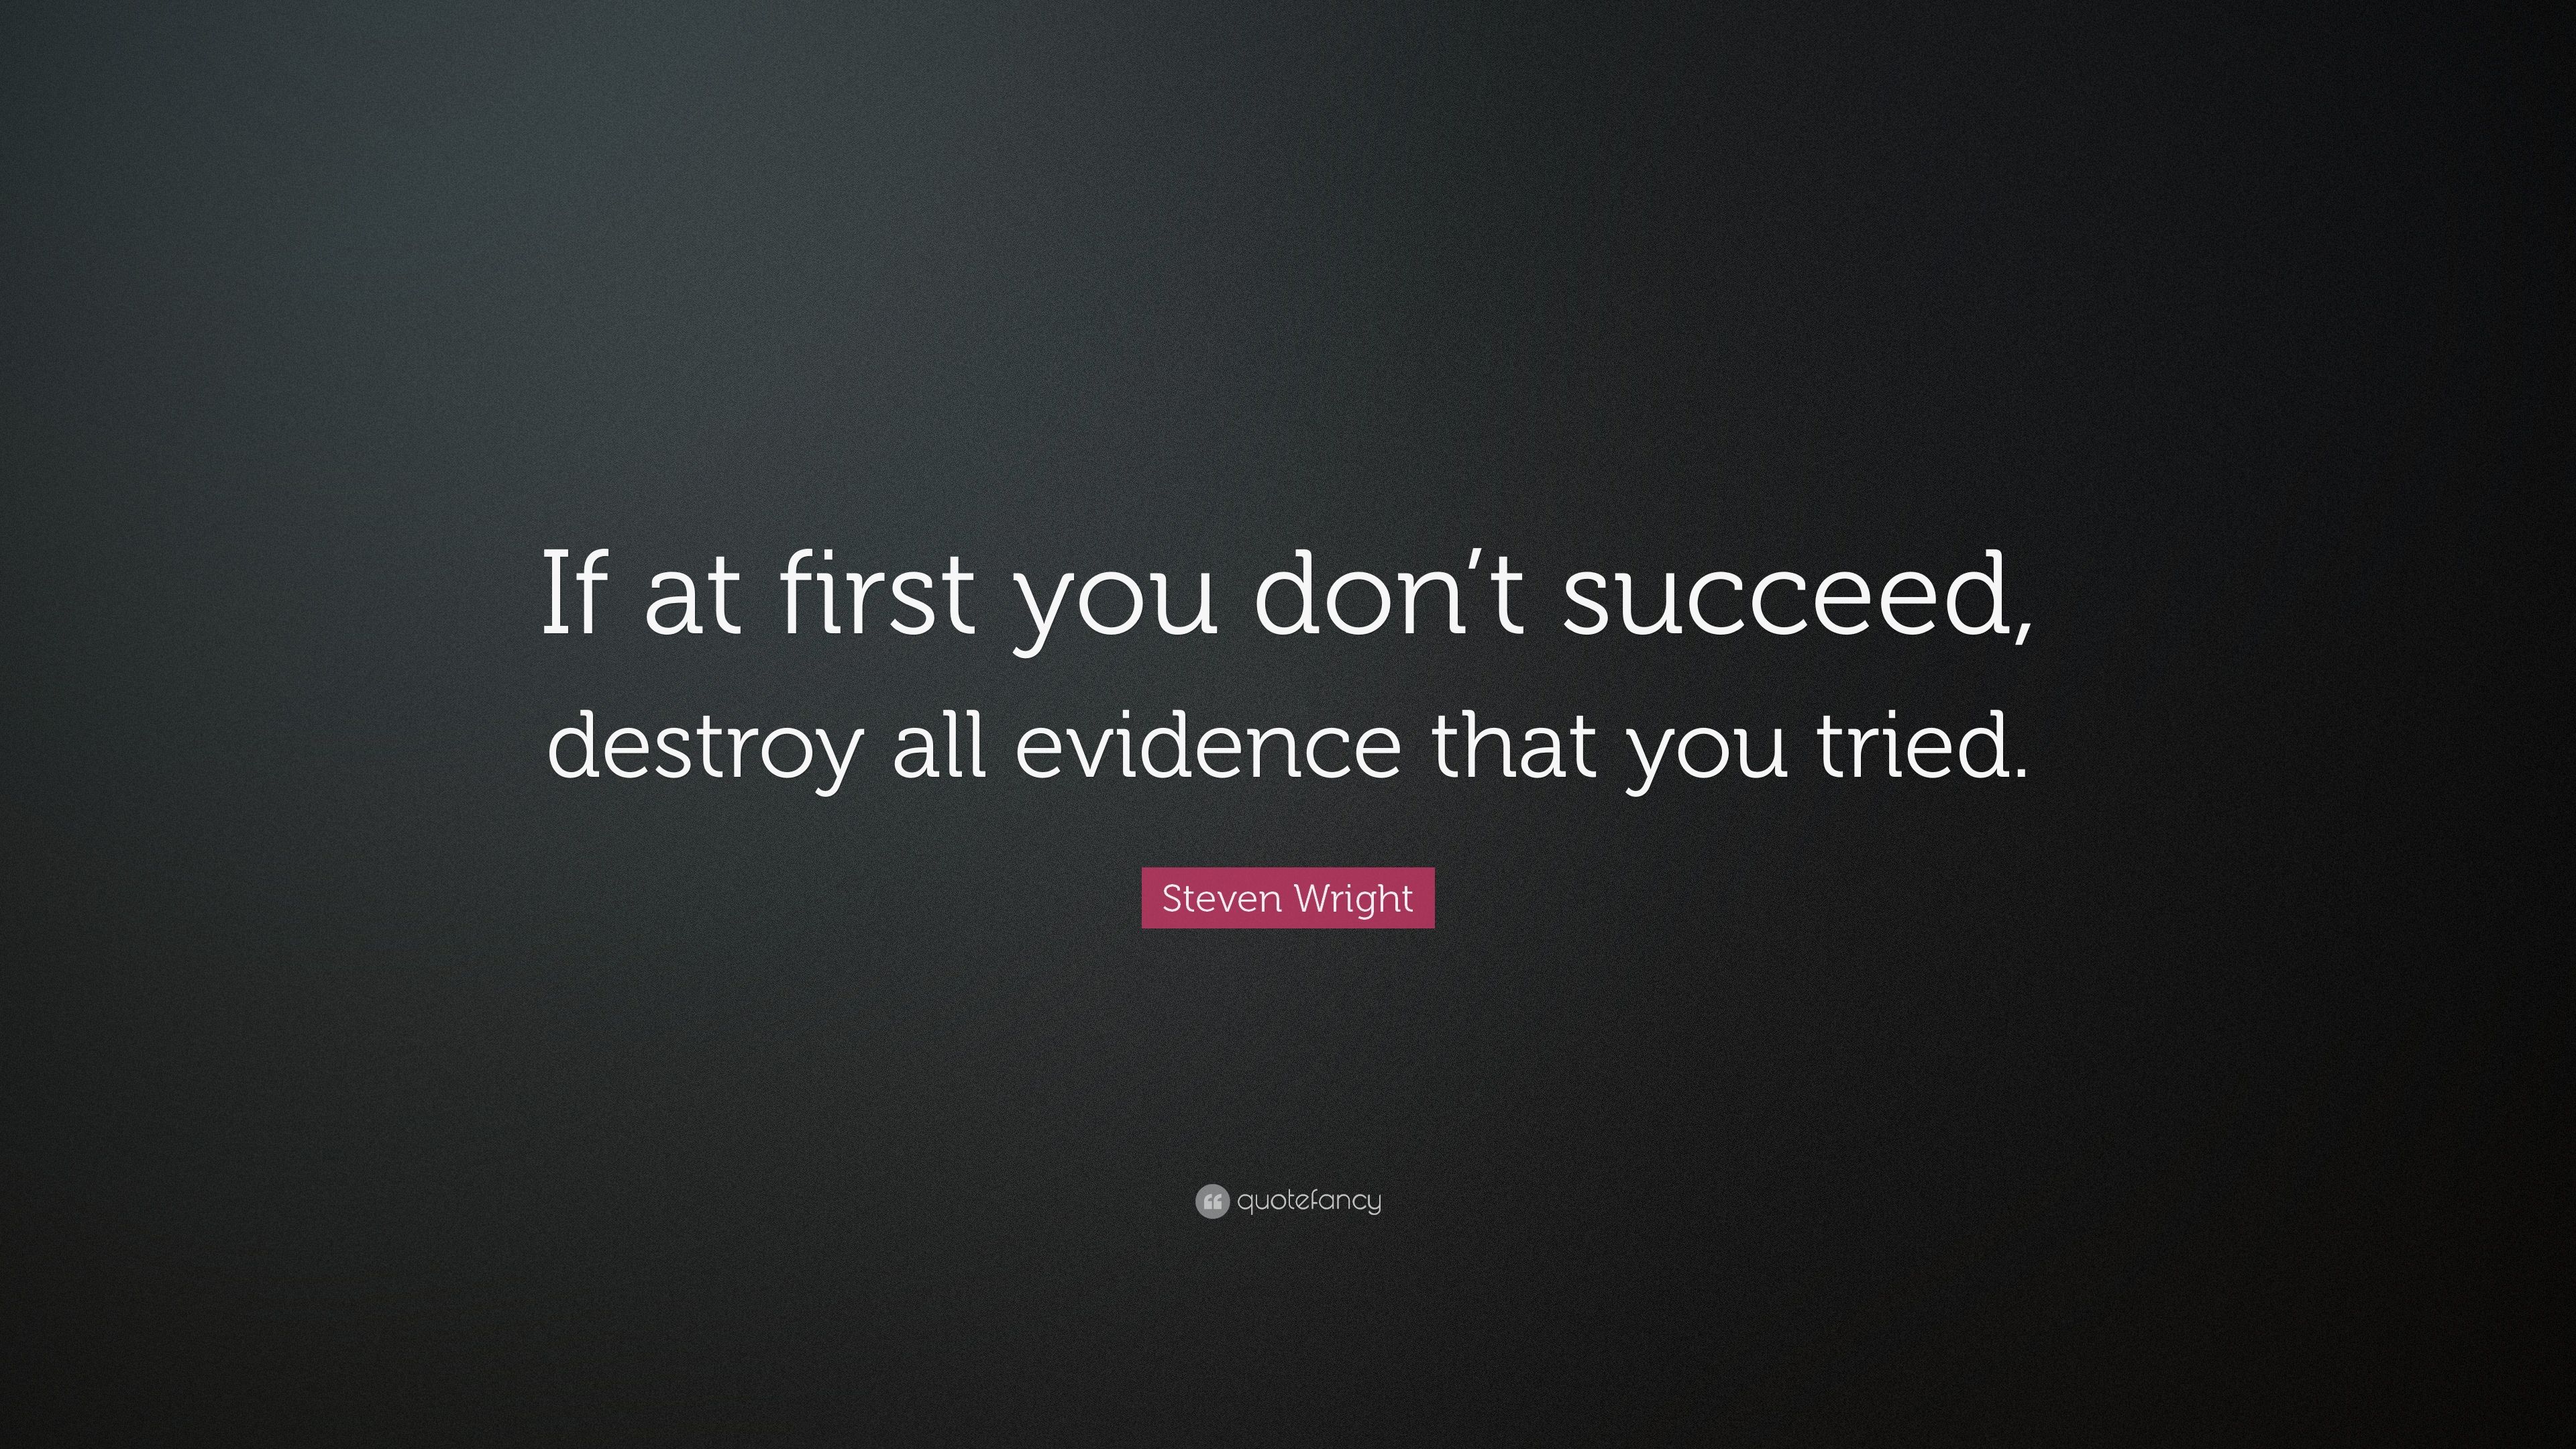 Steven Wright Quote: “If at first you don't succeed, destroy all evidence that you tried.”